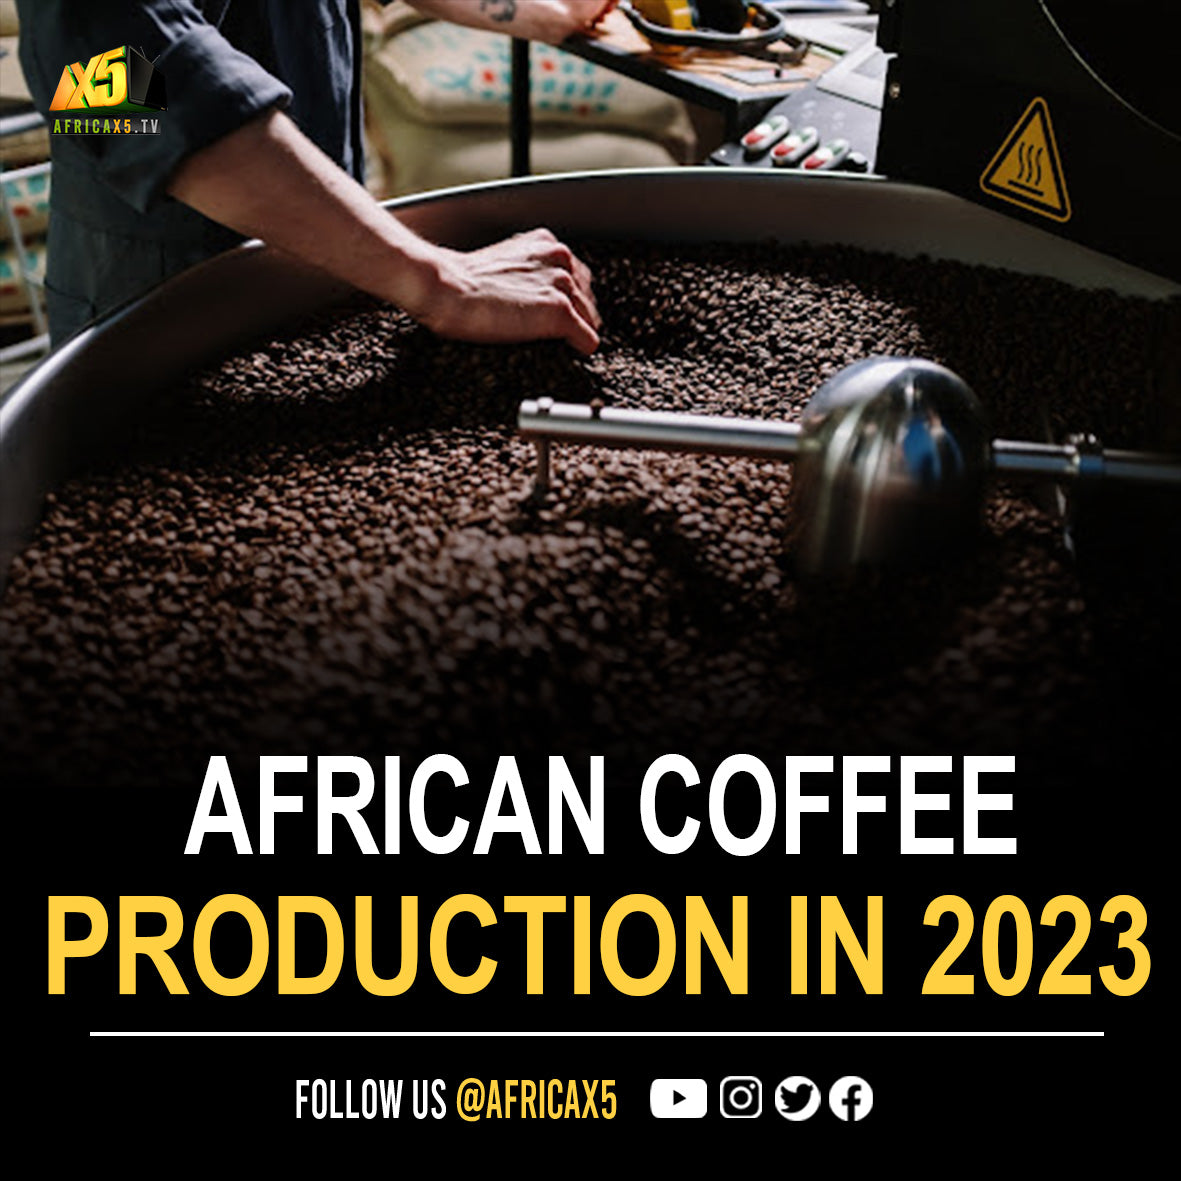 African Coffee Production In 2023